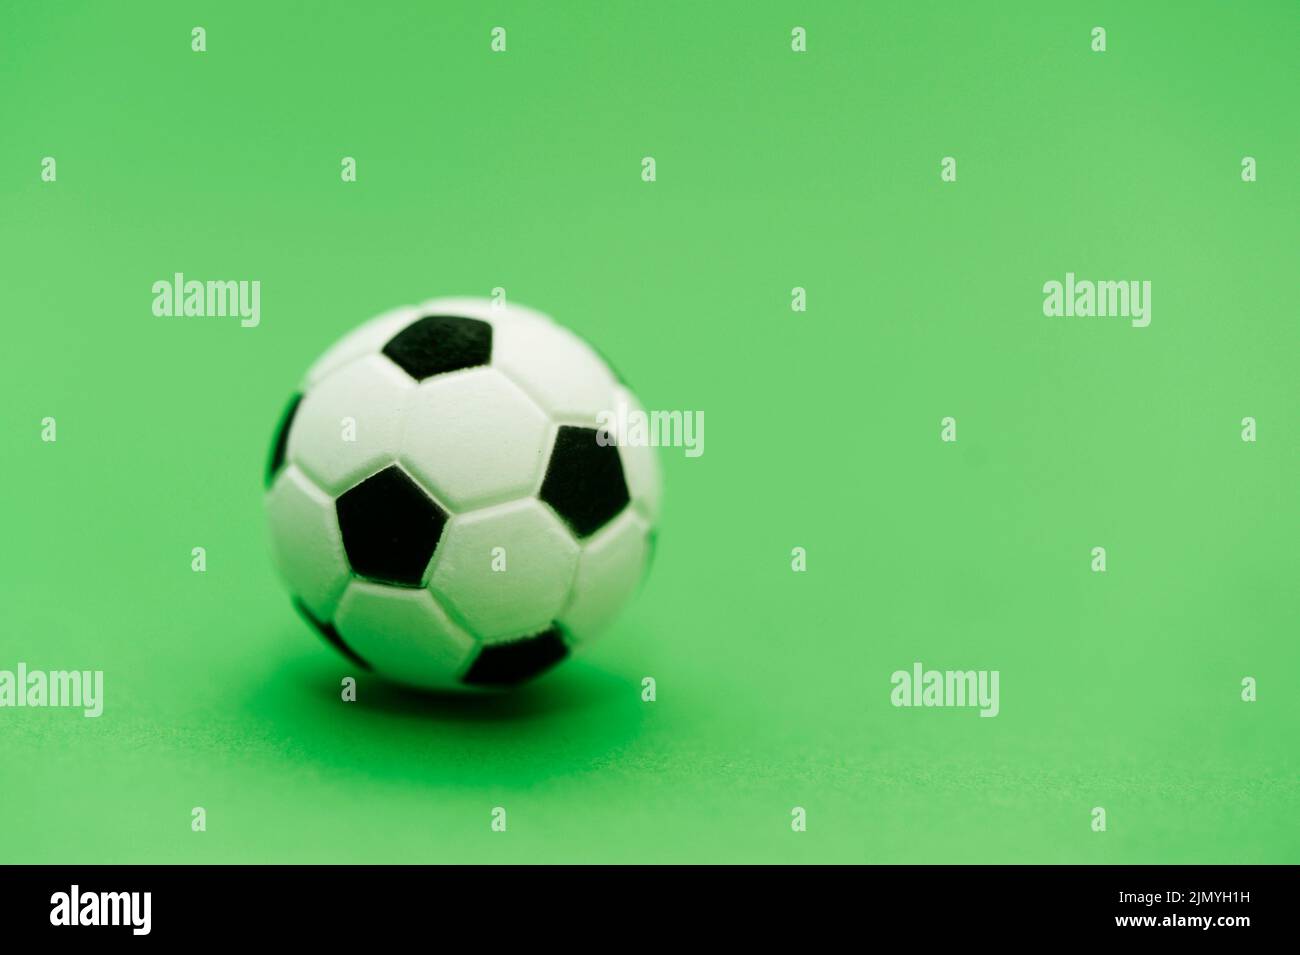 miniature soccer ball over green background Stock Photo